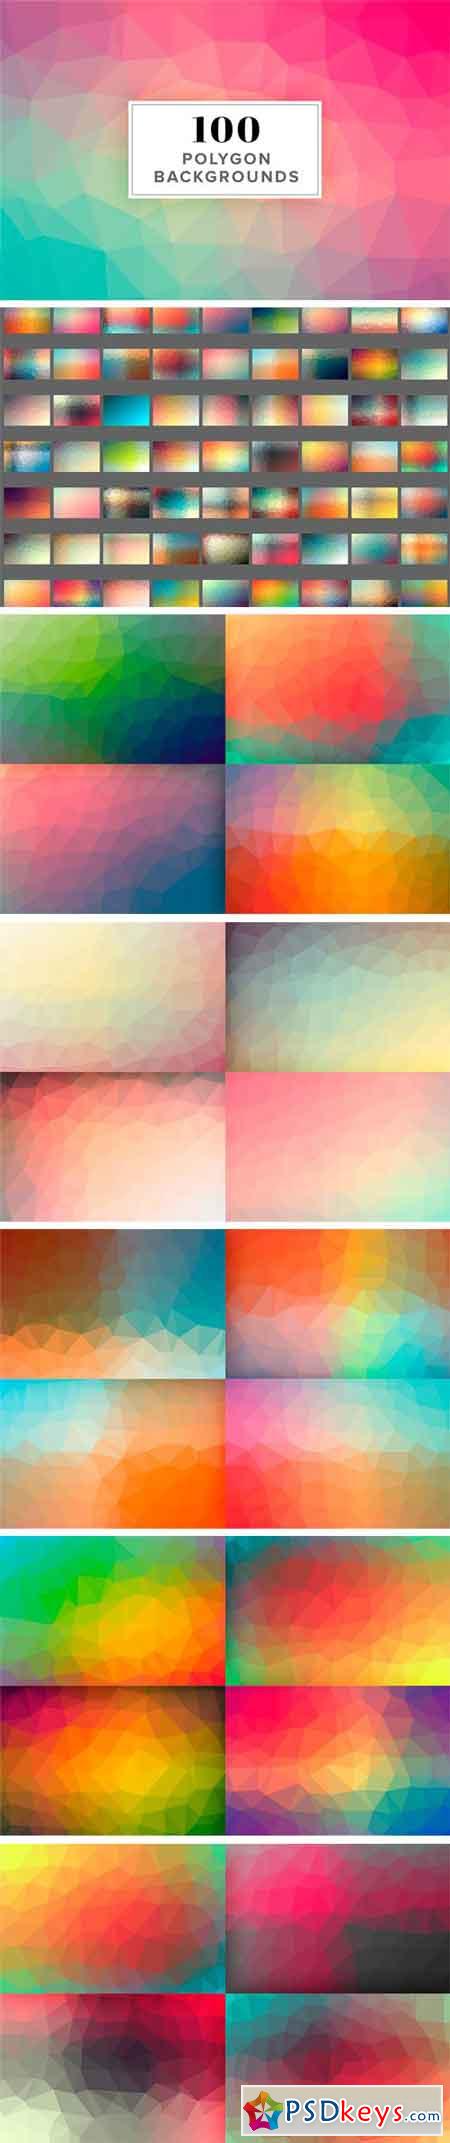 100 Polygon Background Images 1237448